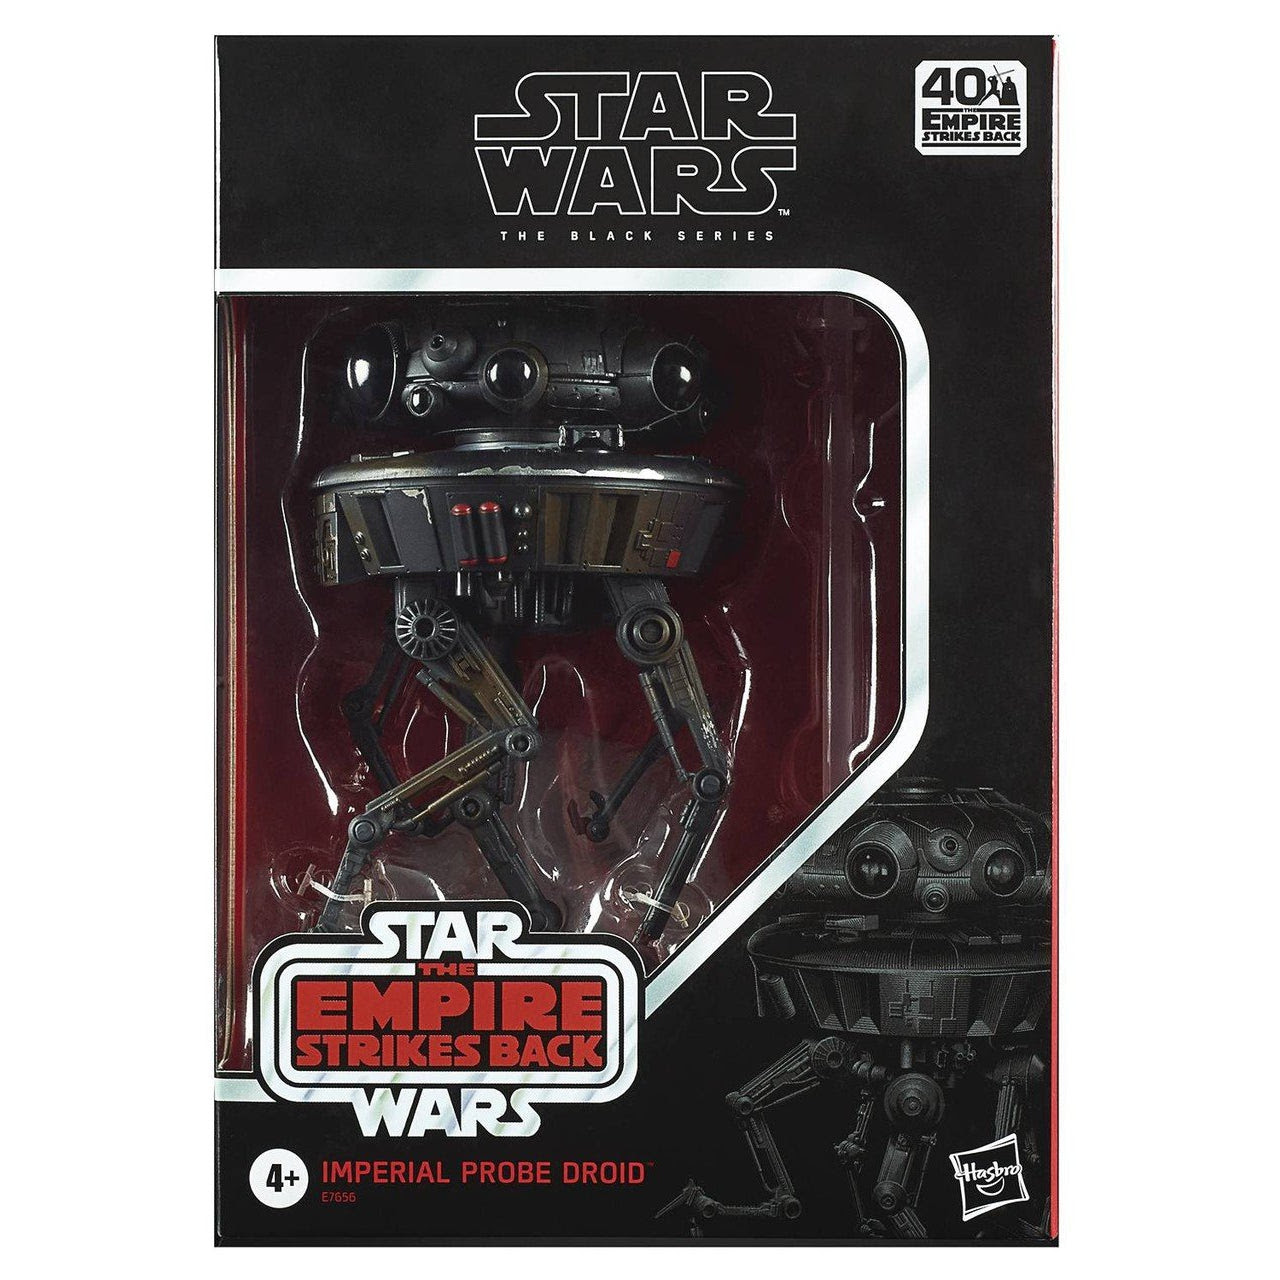 Image of Star Wars The Black Series 6" Scale Imperial Probe Droid - BACKORDER MAY 2020